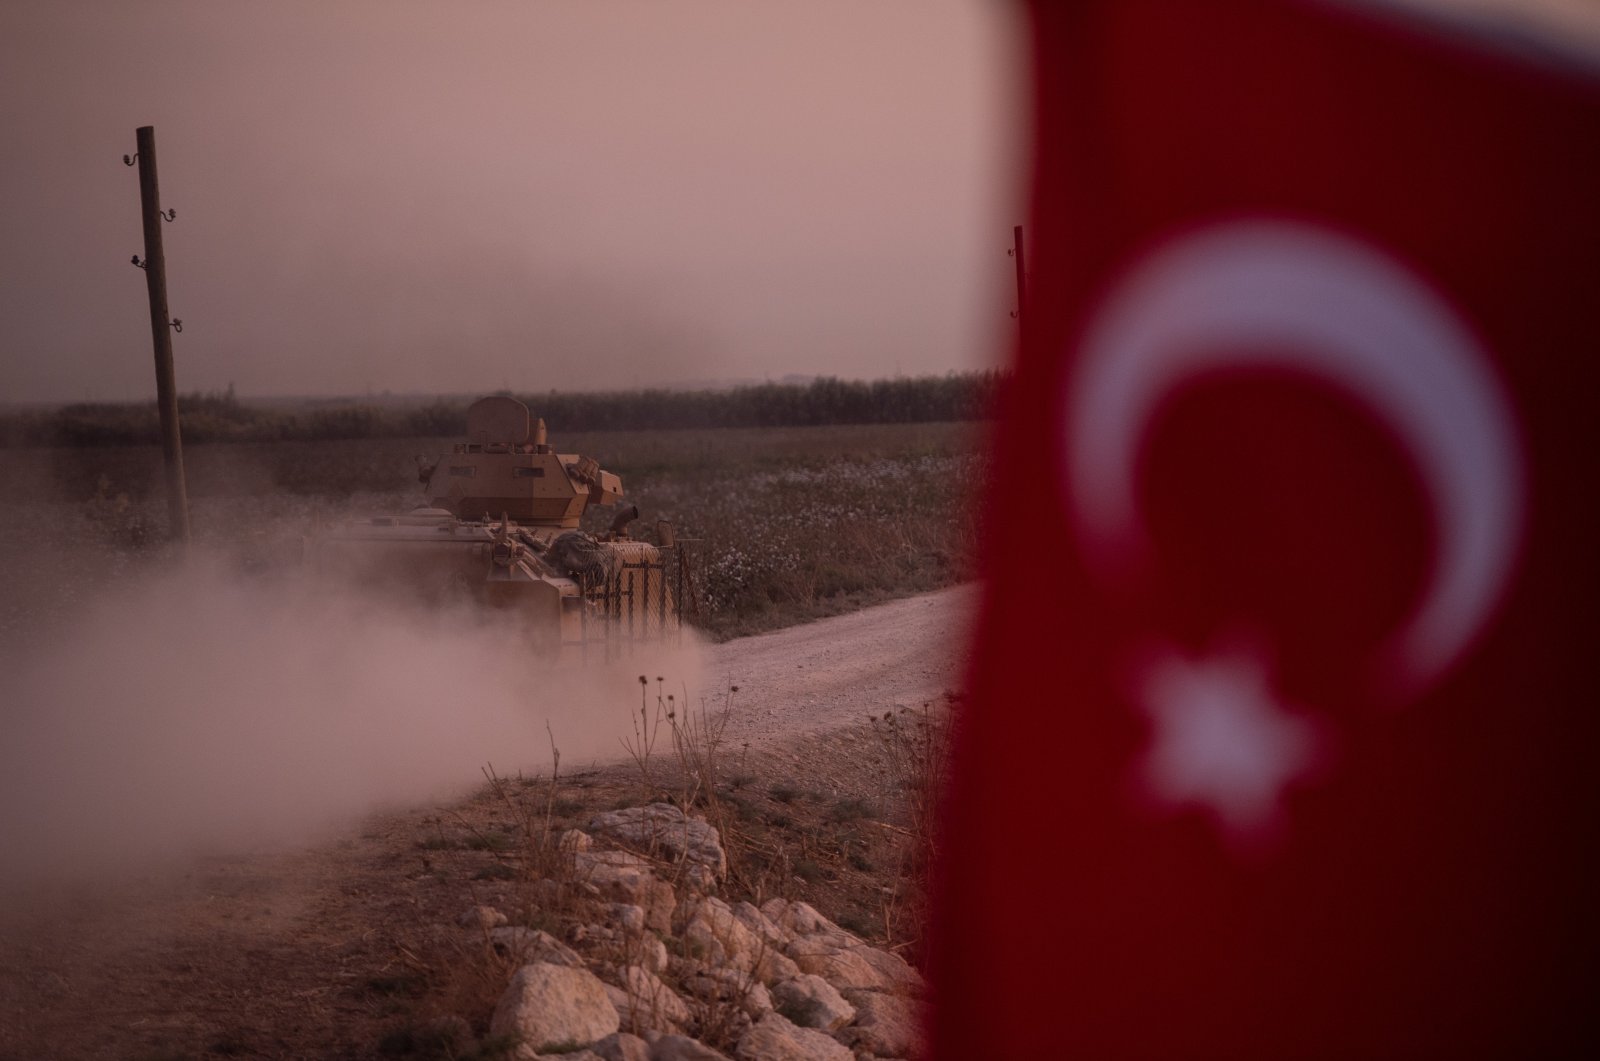 A Turkish armored vehicle prepares to cross the border into Syria, Akçakale, Turkey, Oct. 9, 2019. (Photo by Getty Images)